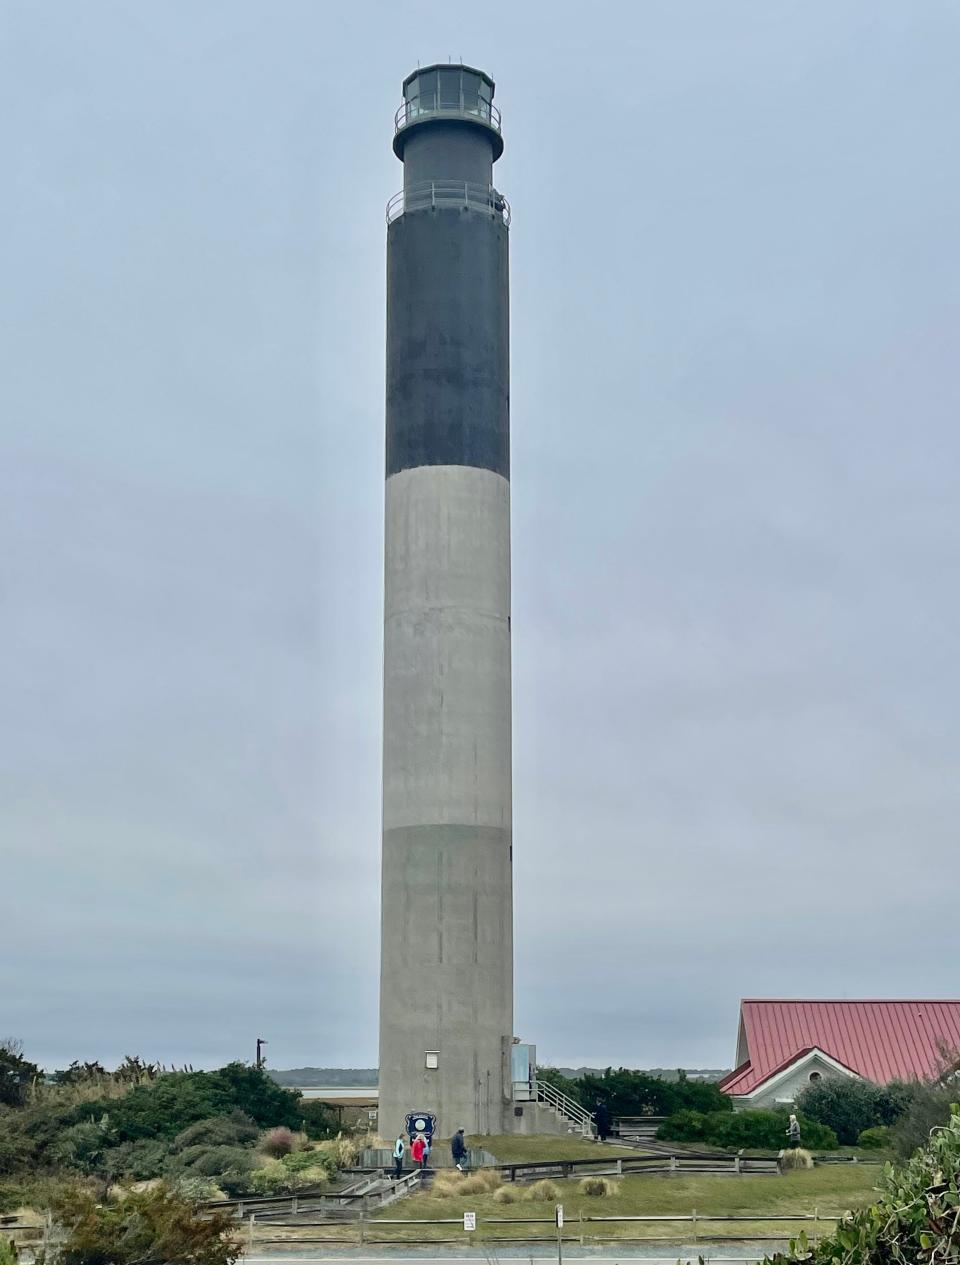 Oak Island Lighthouse was one of the last lighthouses built in the United States.